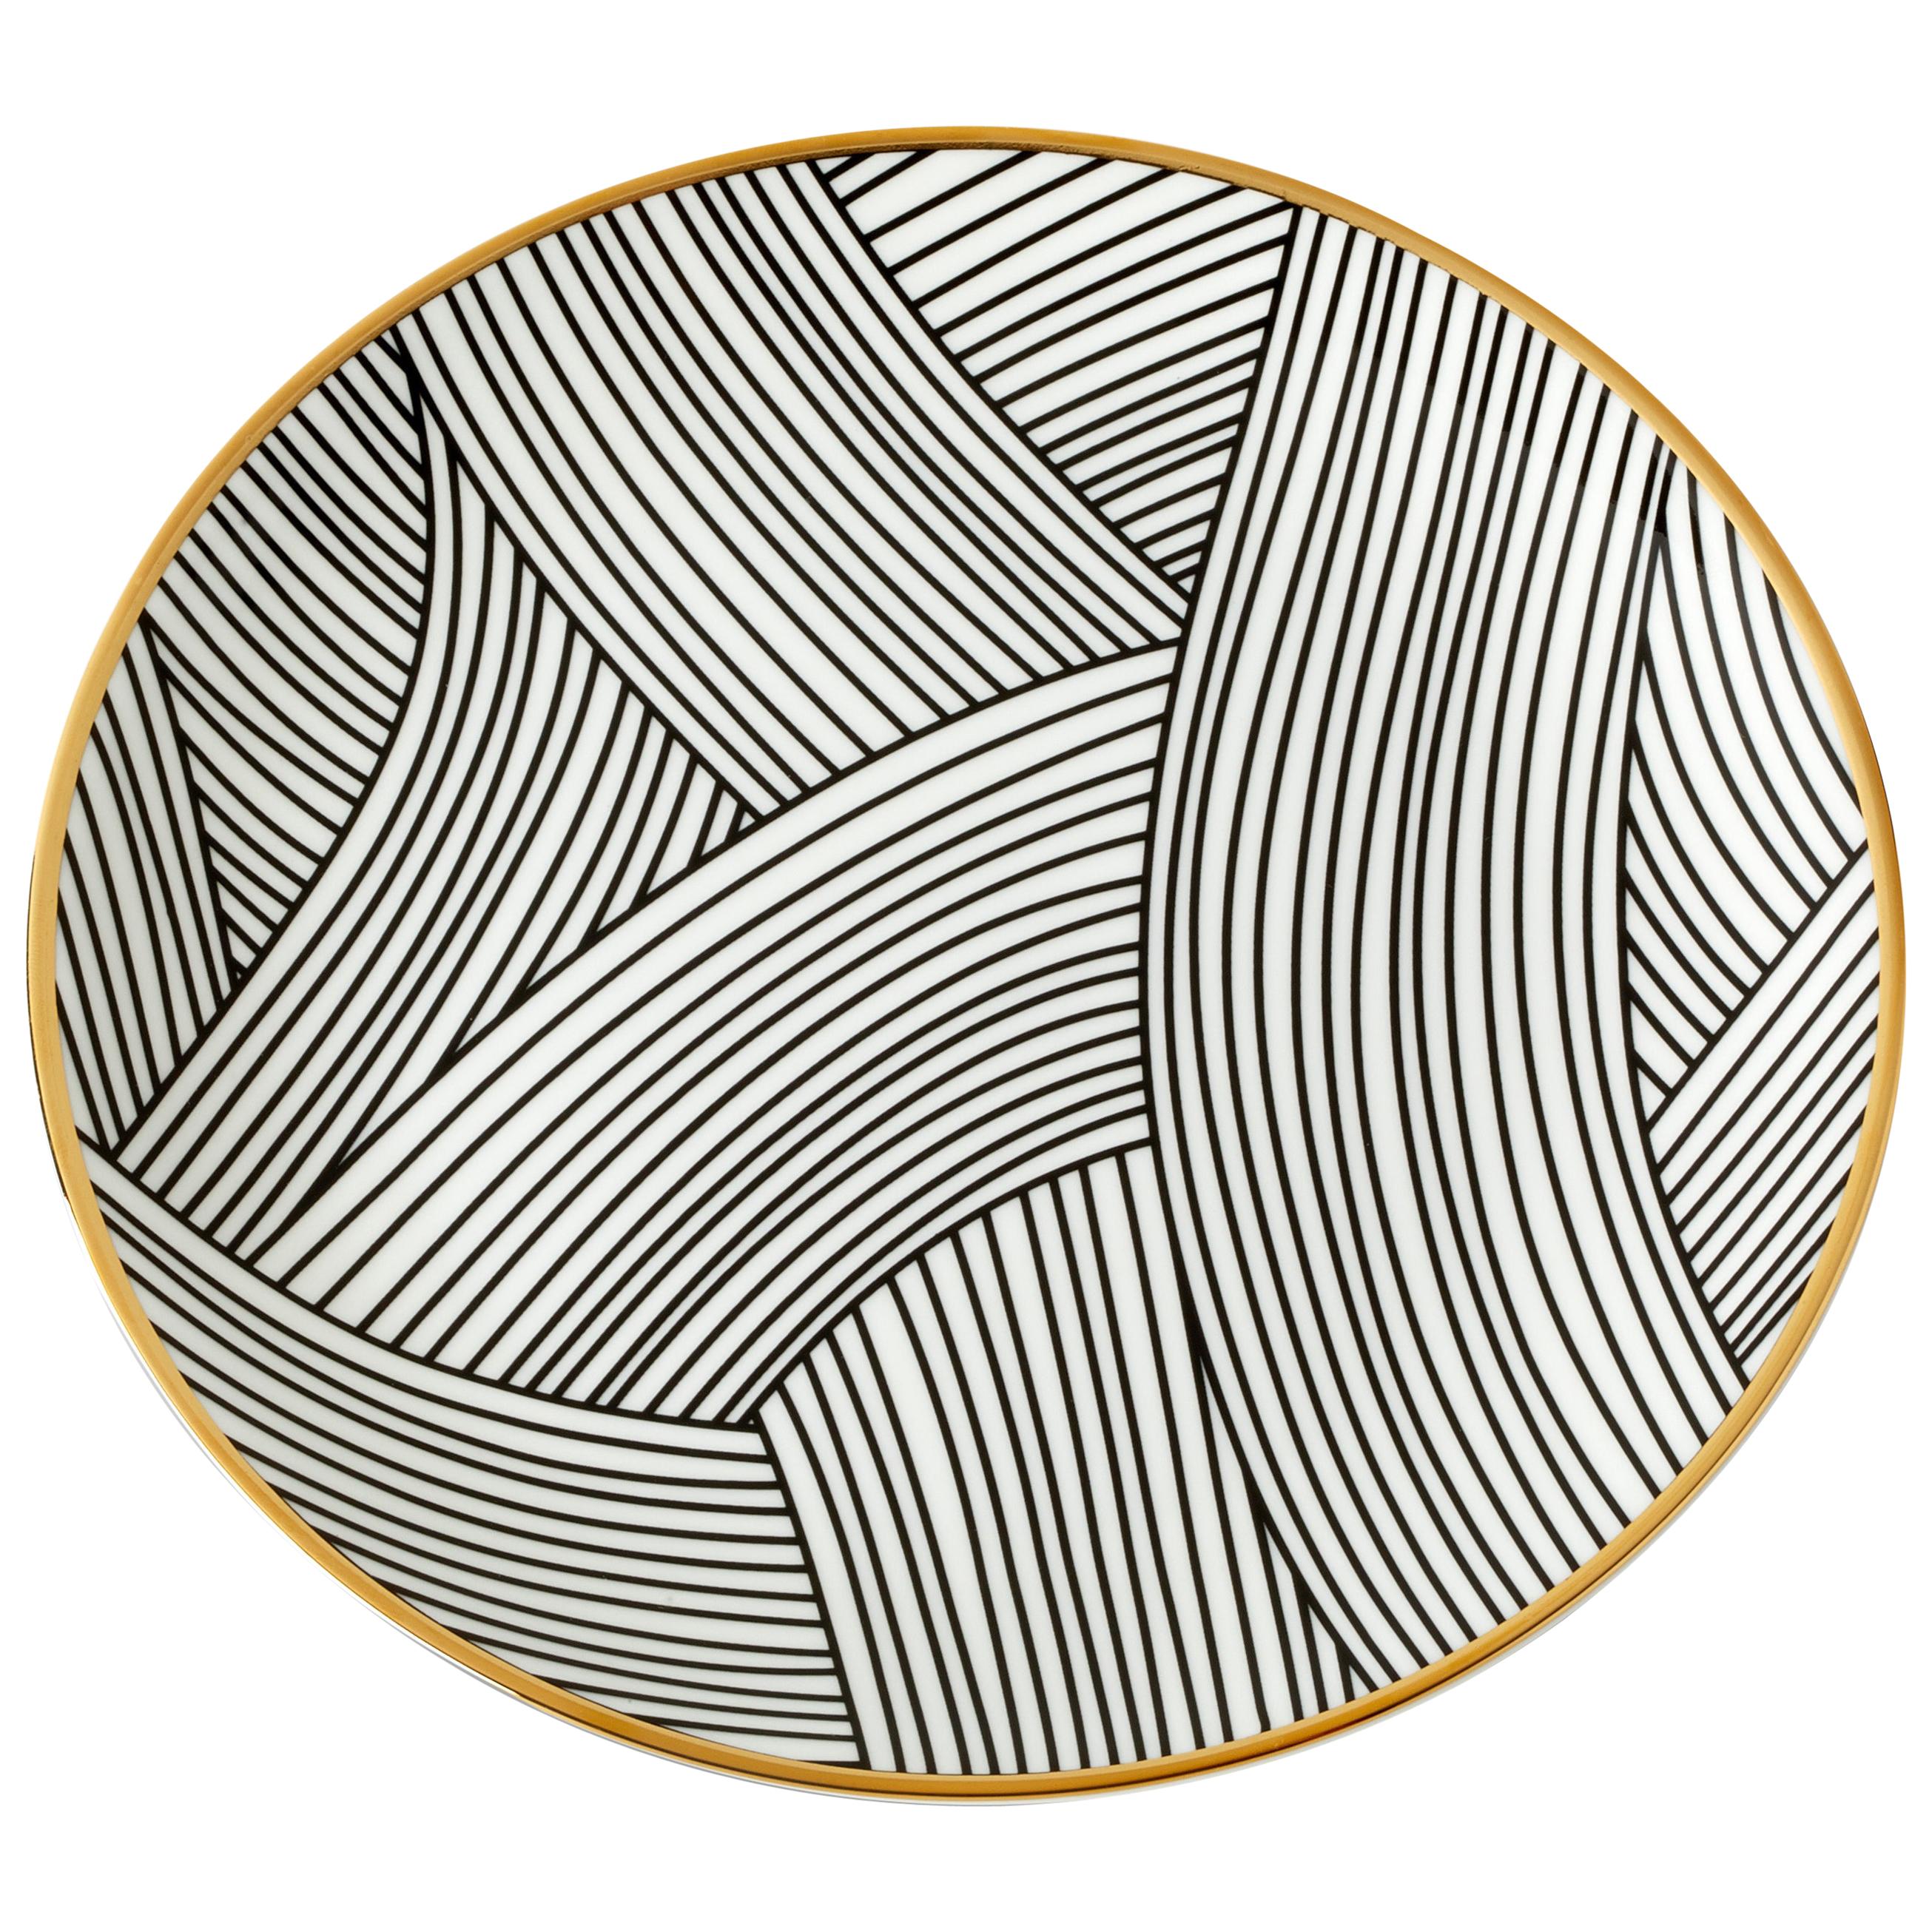 Bone China Salad Plate with 22-Carat Gold and Black Decals